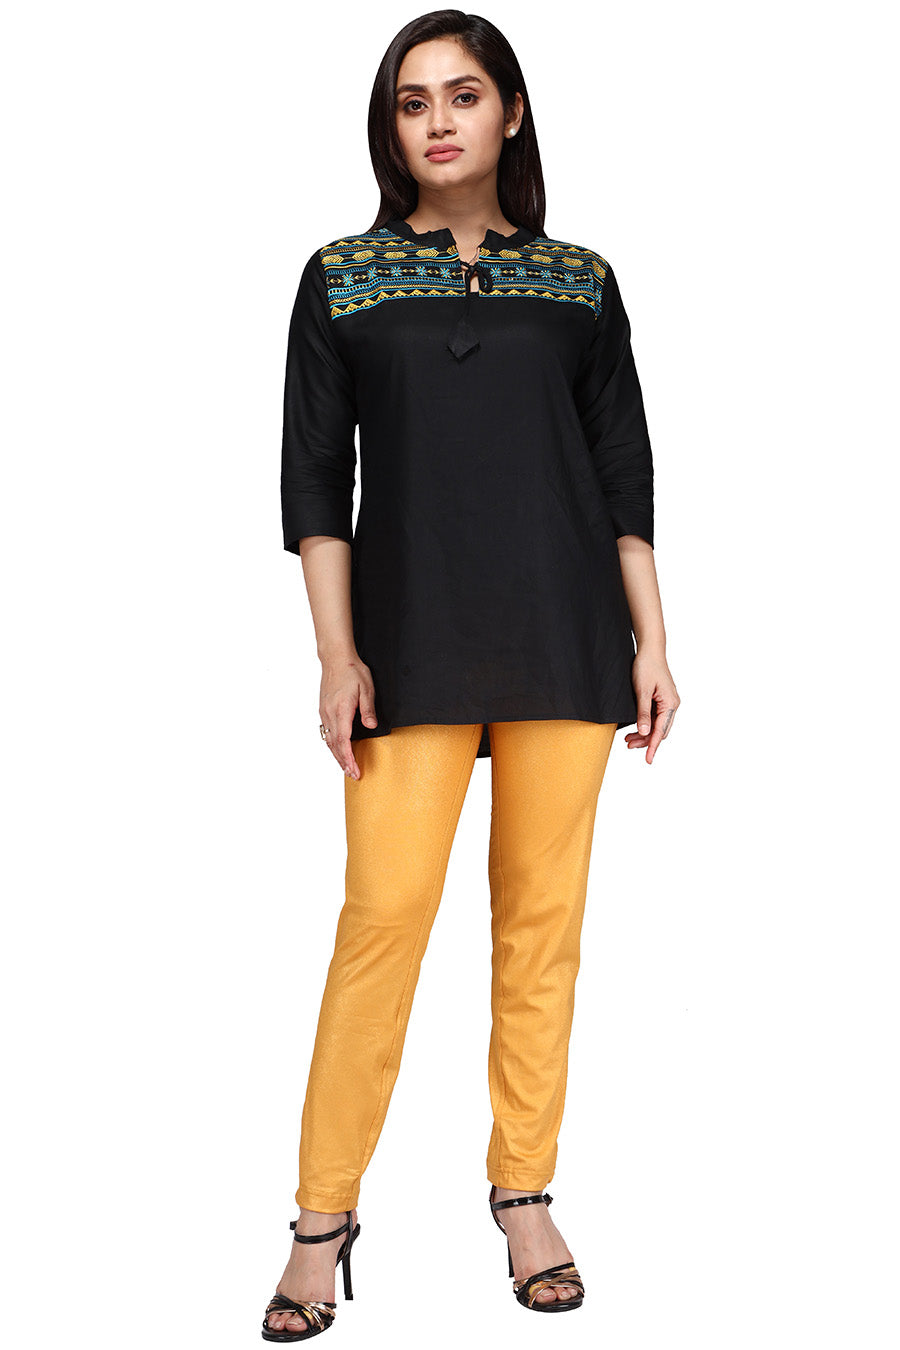 Comfort Lady Shimmer Kurti Pants - Comfort Lady Private Limited